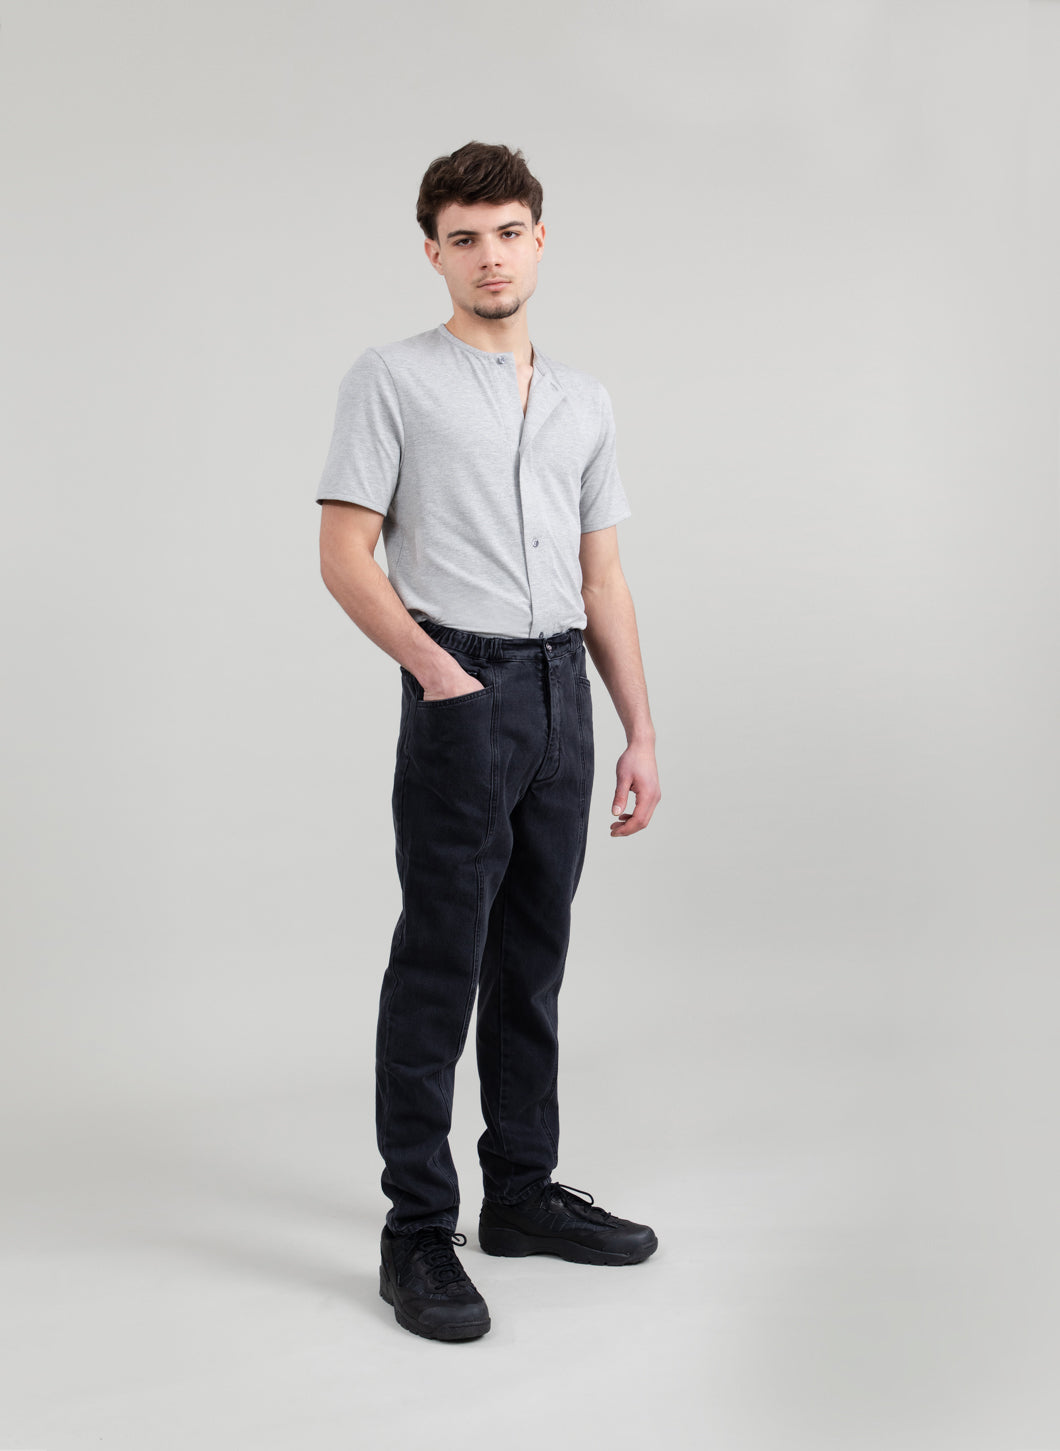 5-Pocket Pants with Front Cuts in Black Denim